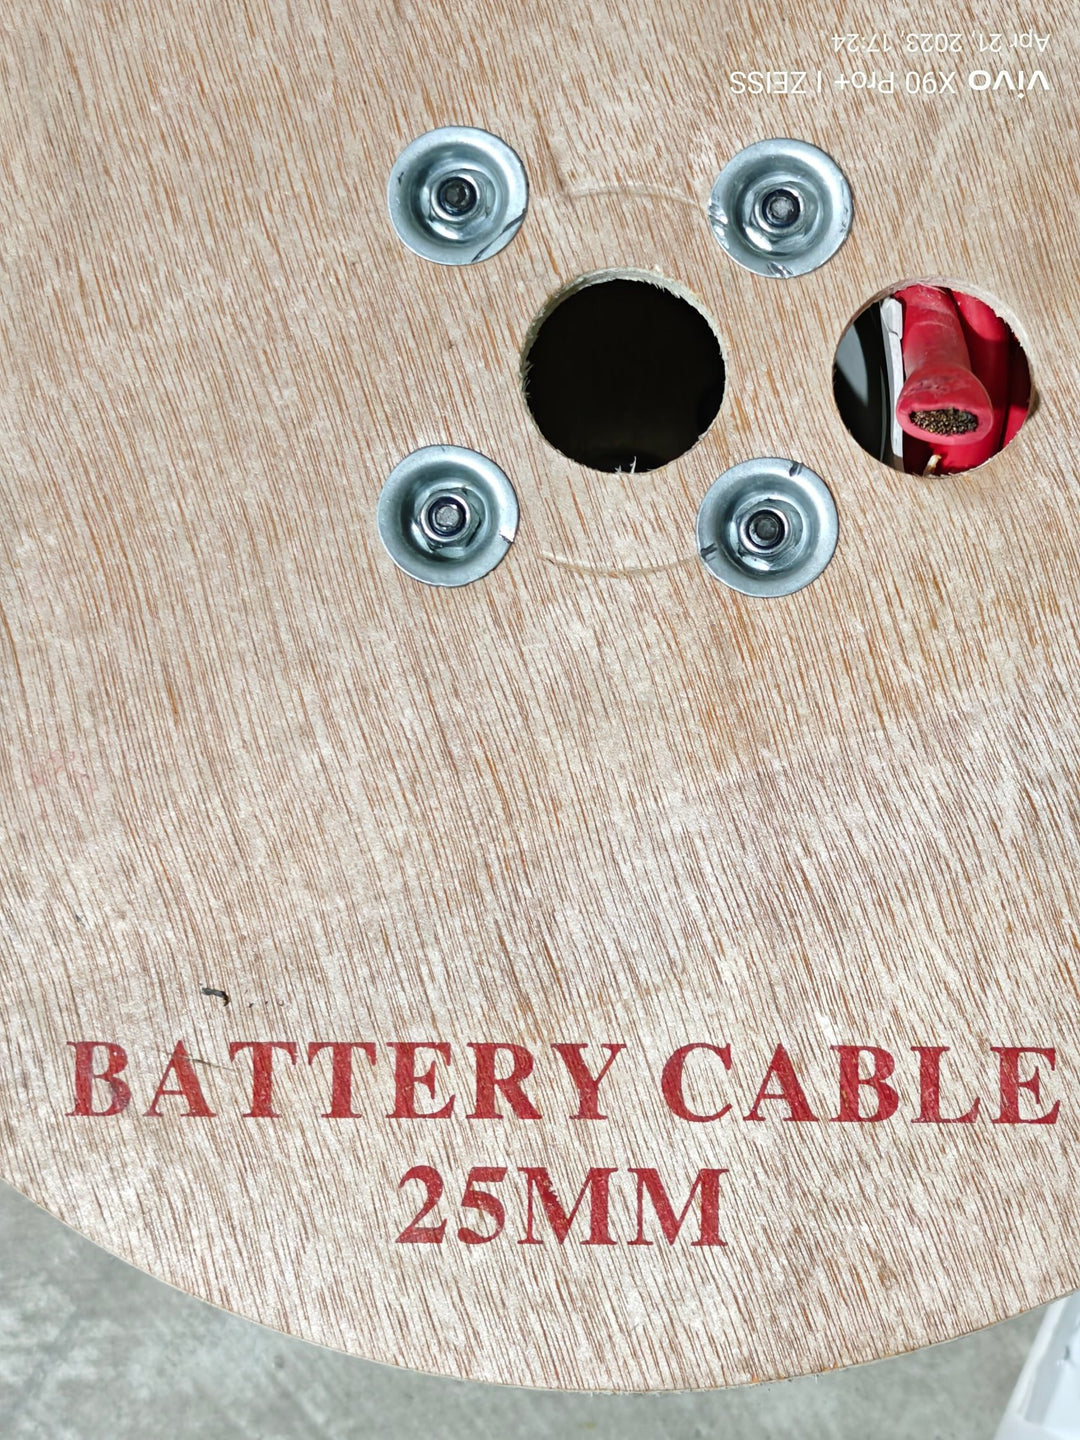 BATTERY CABLE RED 25MM PER M